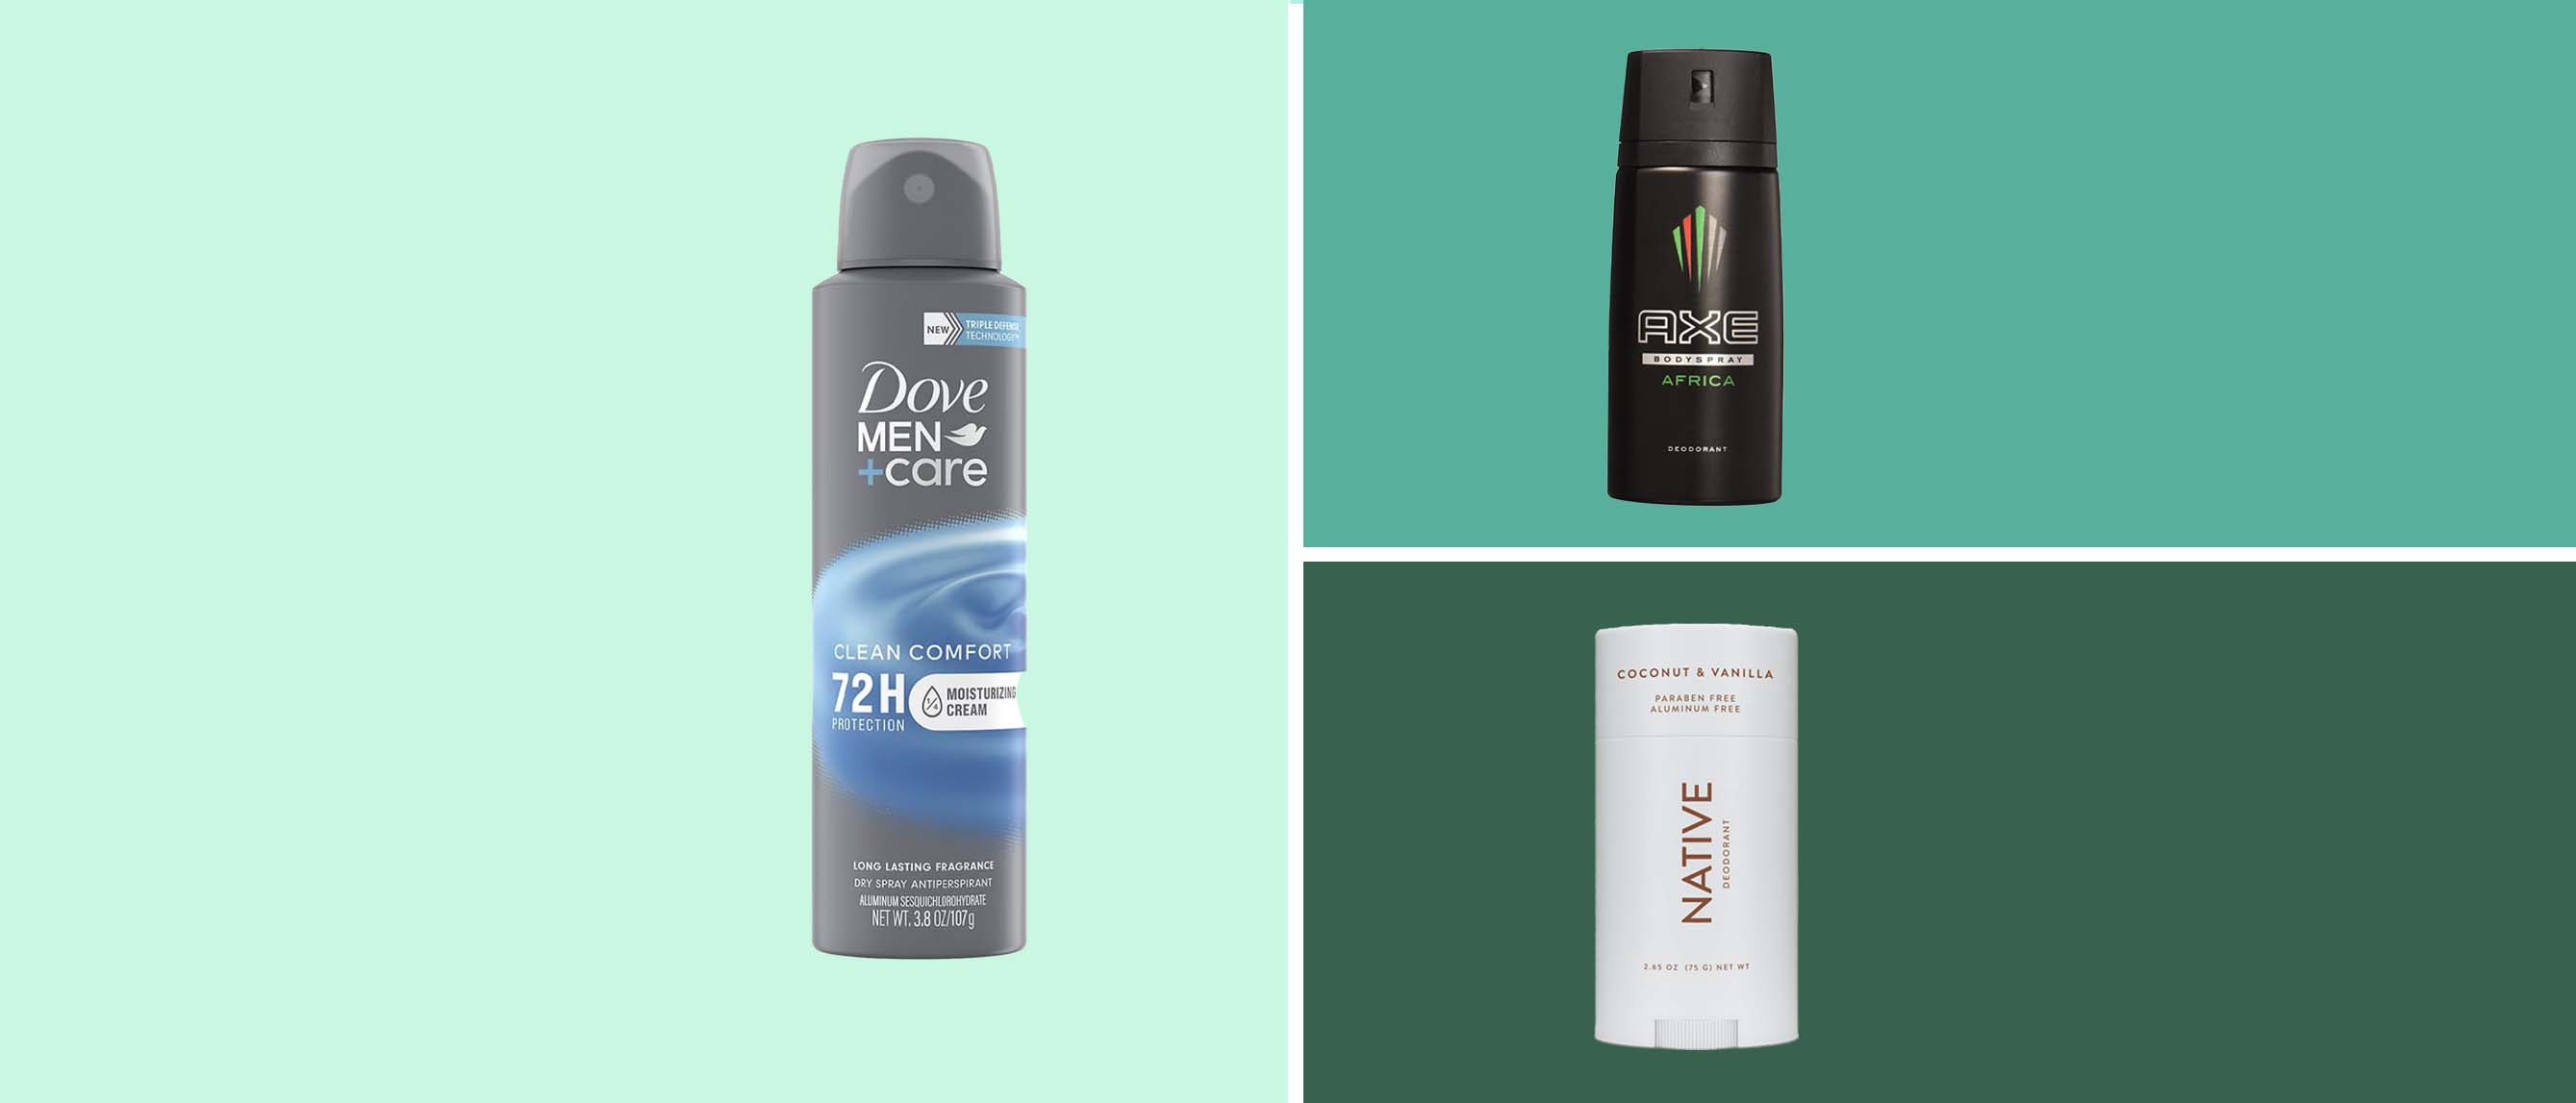 deodorants from axe, dove and native